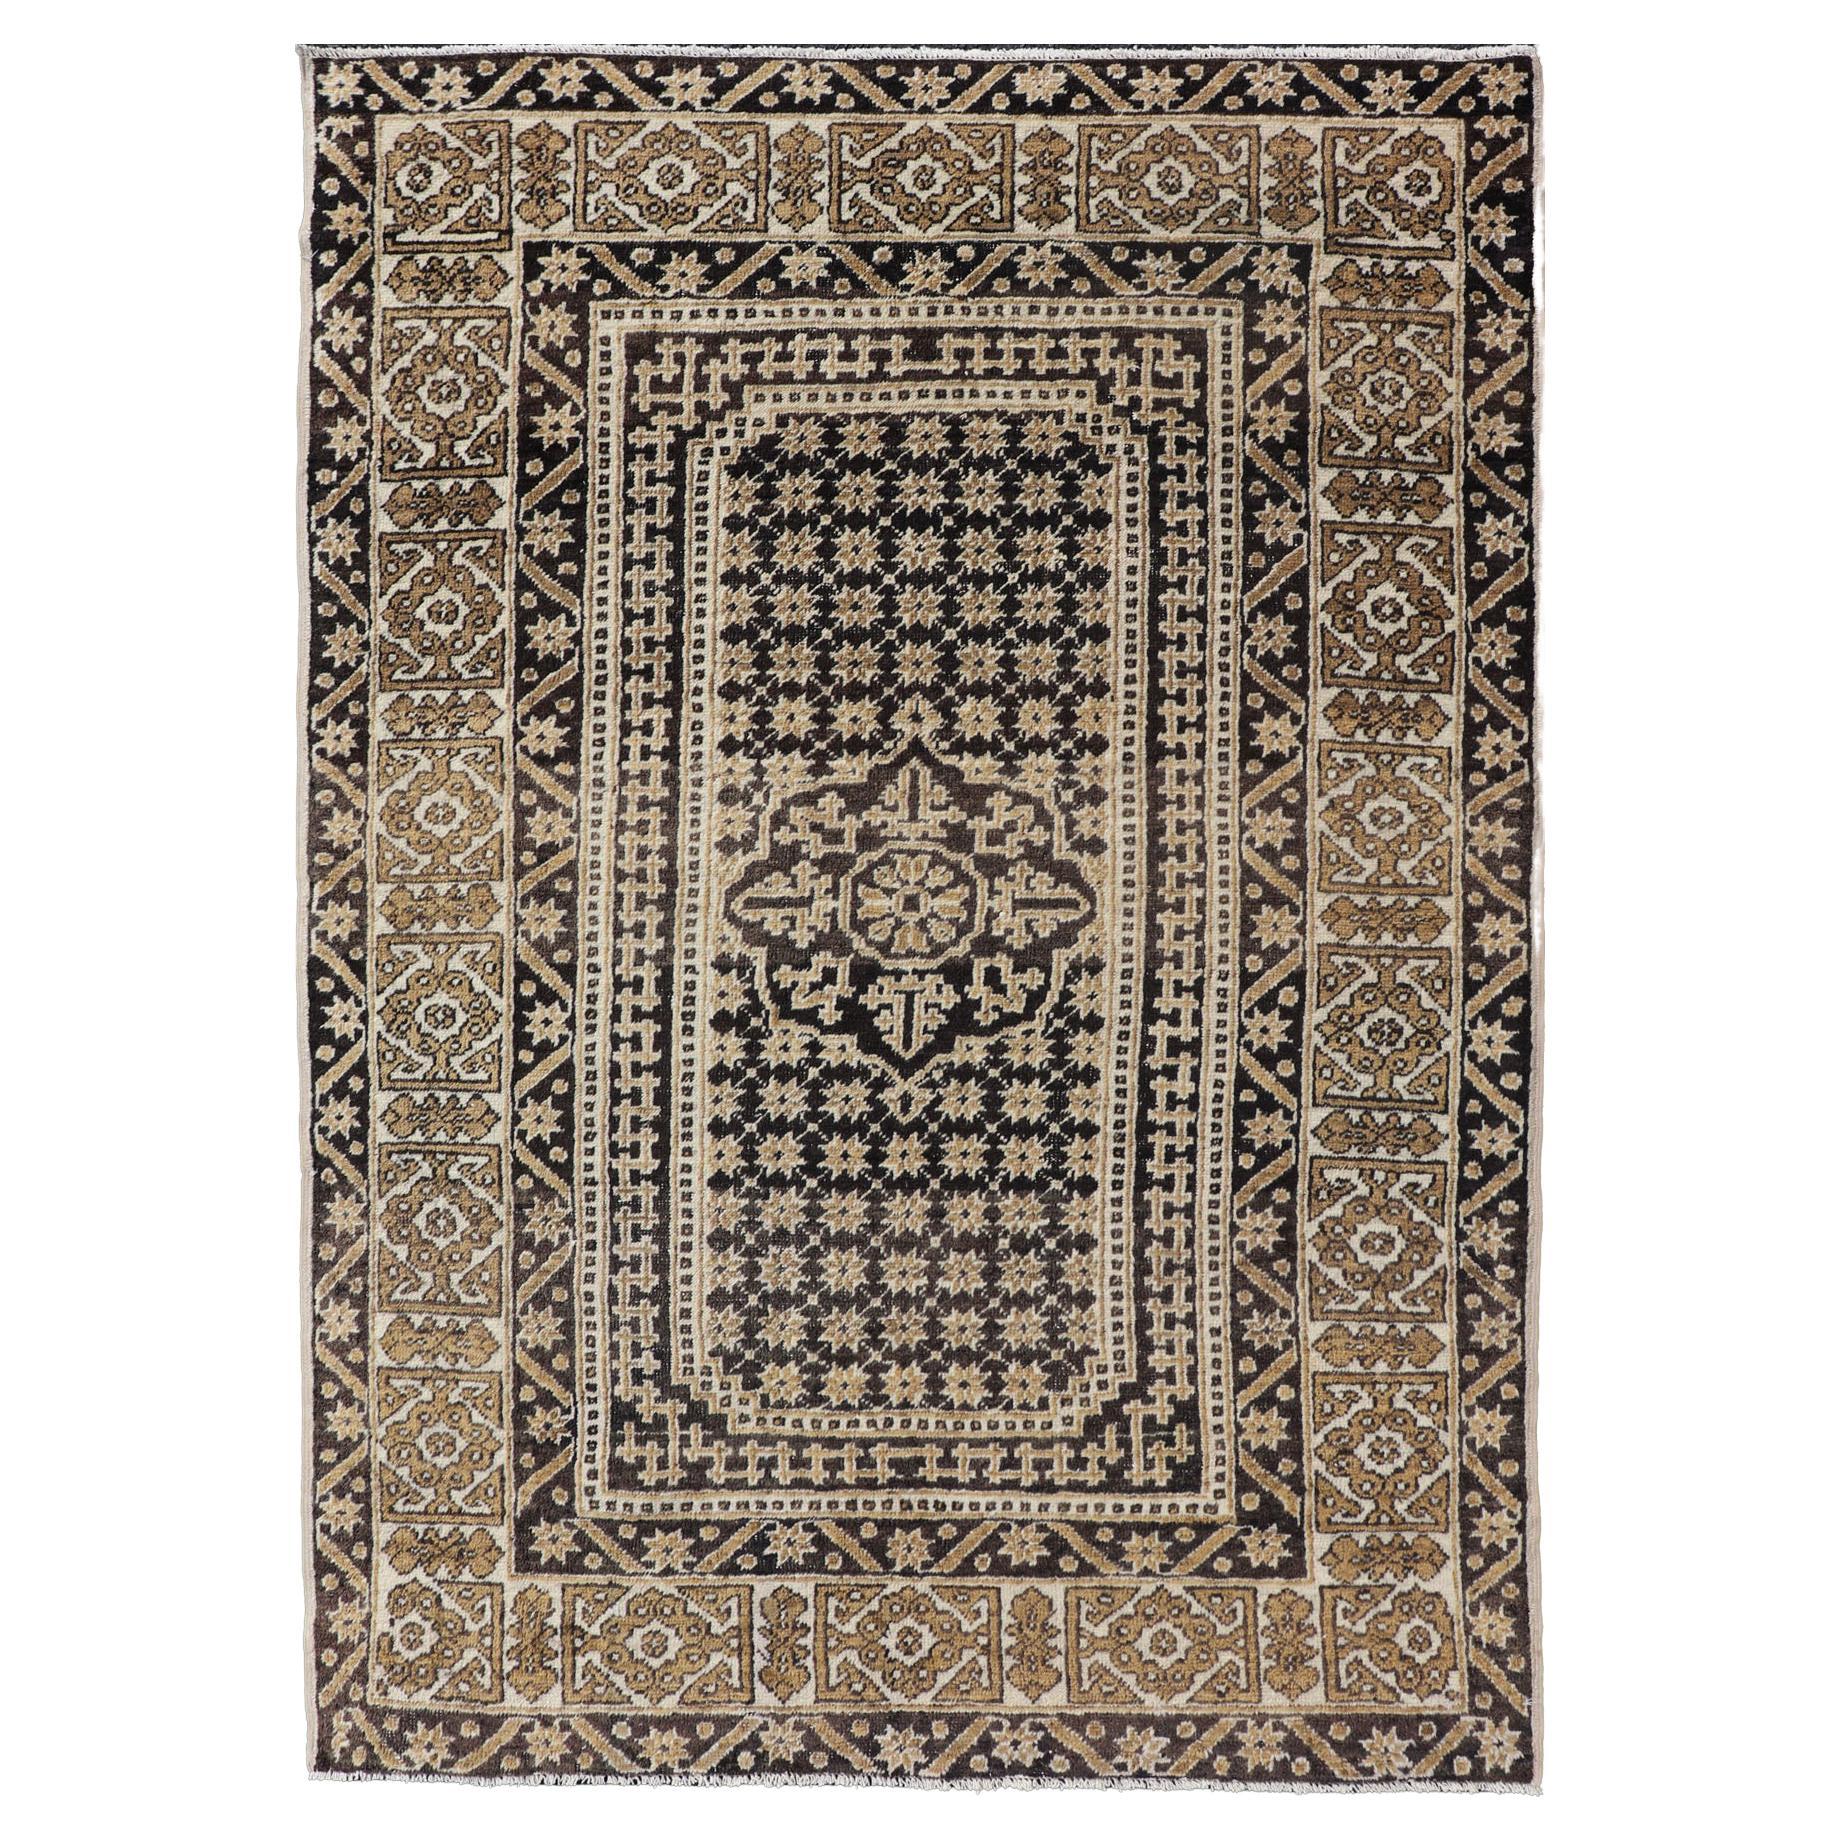 All-Over with Medallion Design Turkish Carpet in Shades of Brown and Cream For Sale